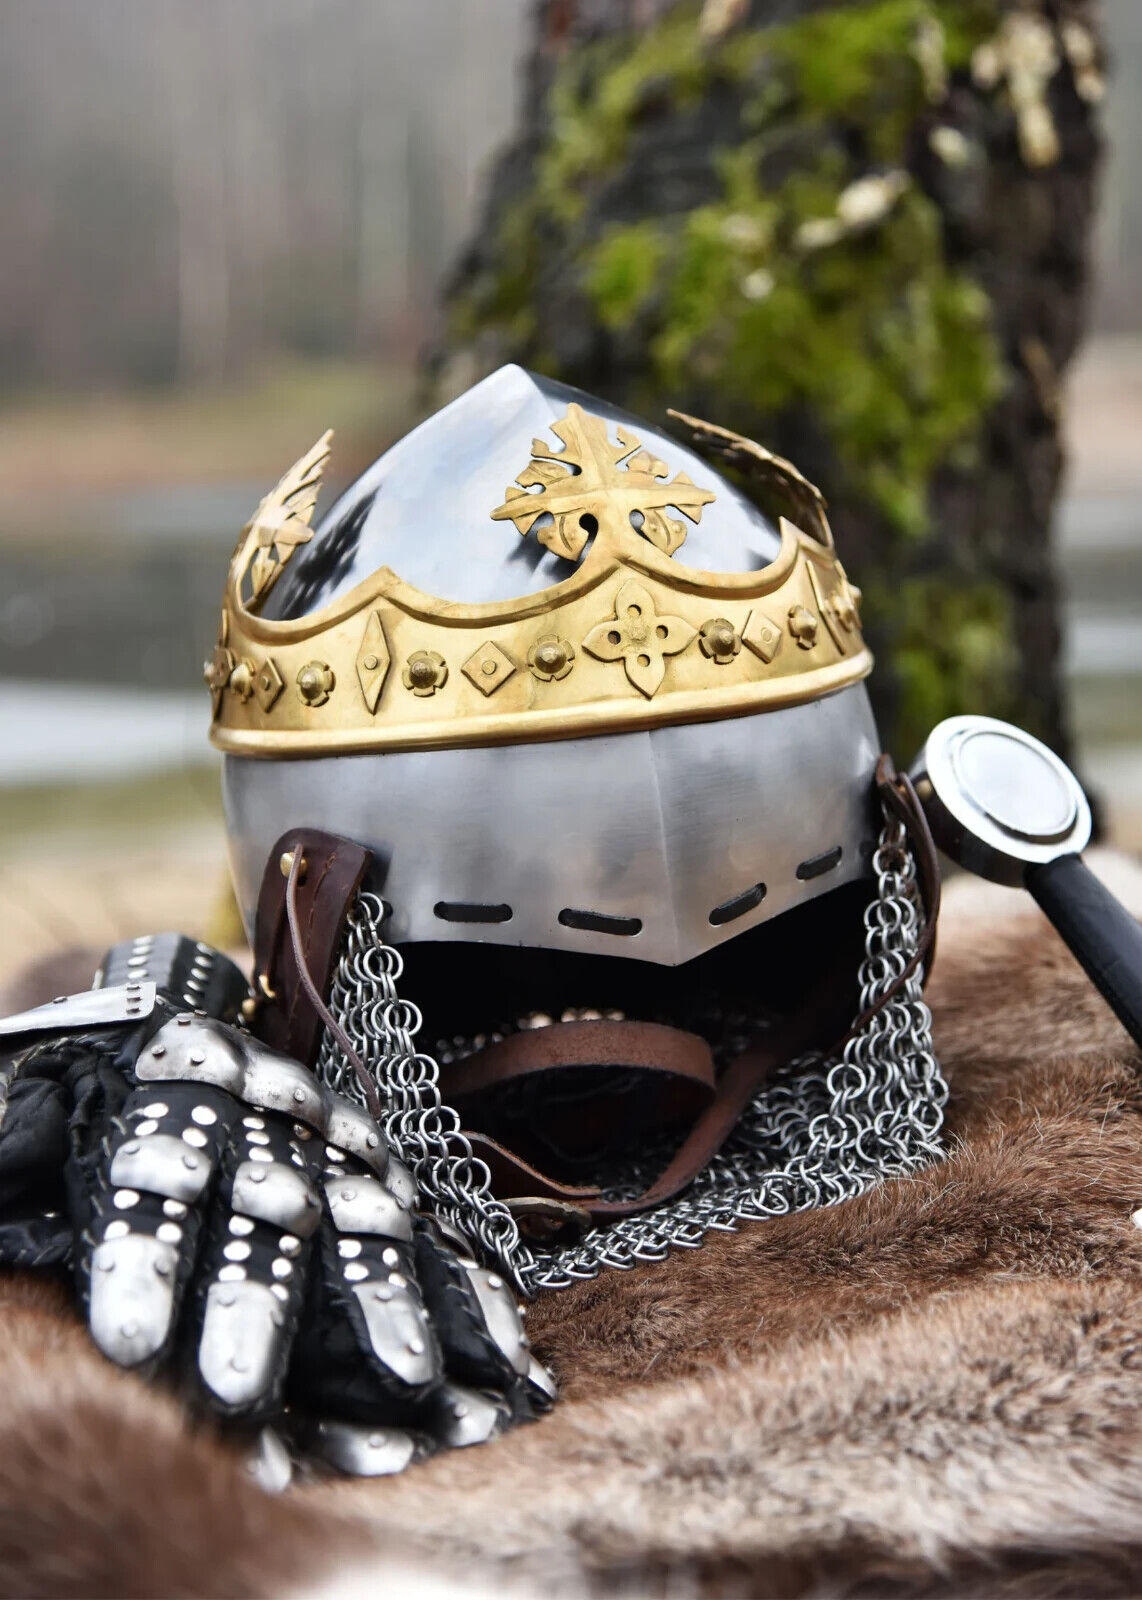 Helmet of Robert the Bruce - Medieval Bascinet with Aventail Historical Replica